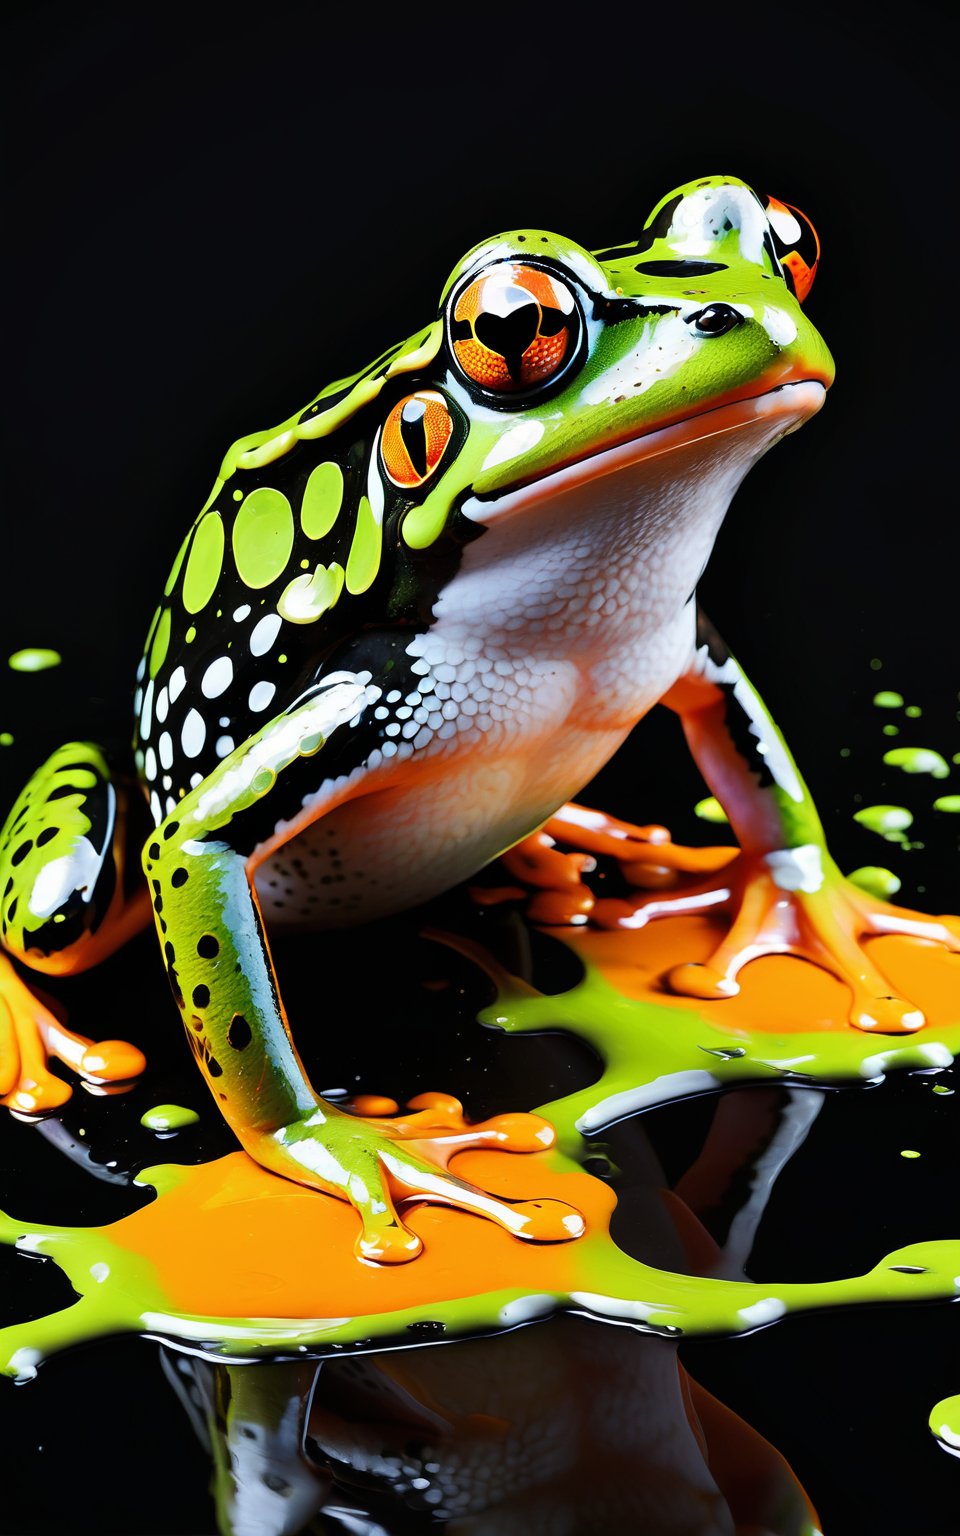 (Artistic bird illustration, high resolution, painted style, colored paint splatters), a [Frog] depicted in a painted style with dynamic and vibrant paint splatters. The main colors are [orange] and [green], set against a [black] background. The artwork captures the lively essence of the [Frog] through the use of bold paint splatters, creating a visually striking and energetic composition.